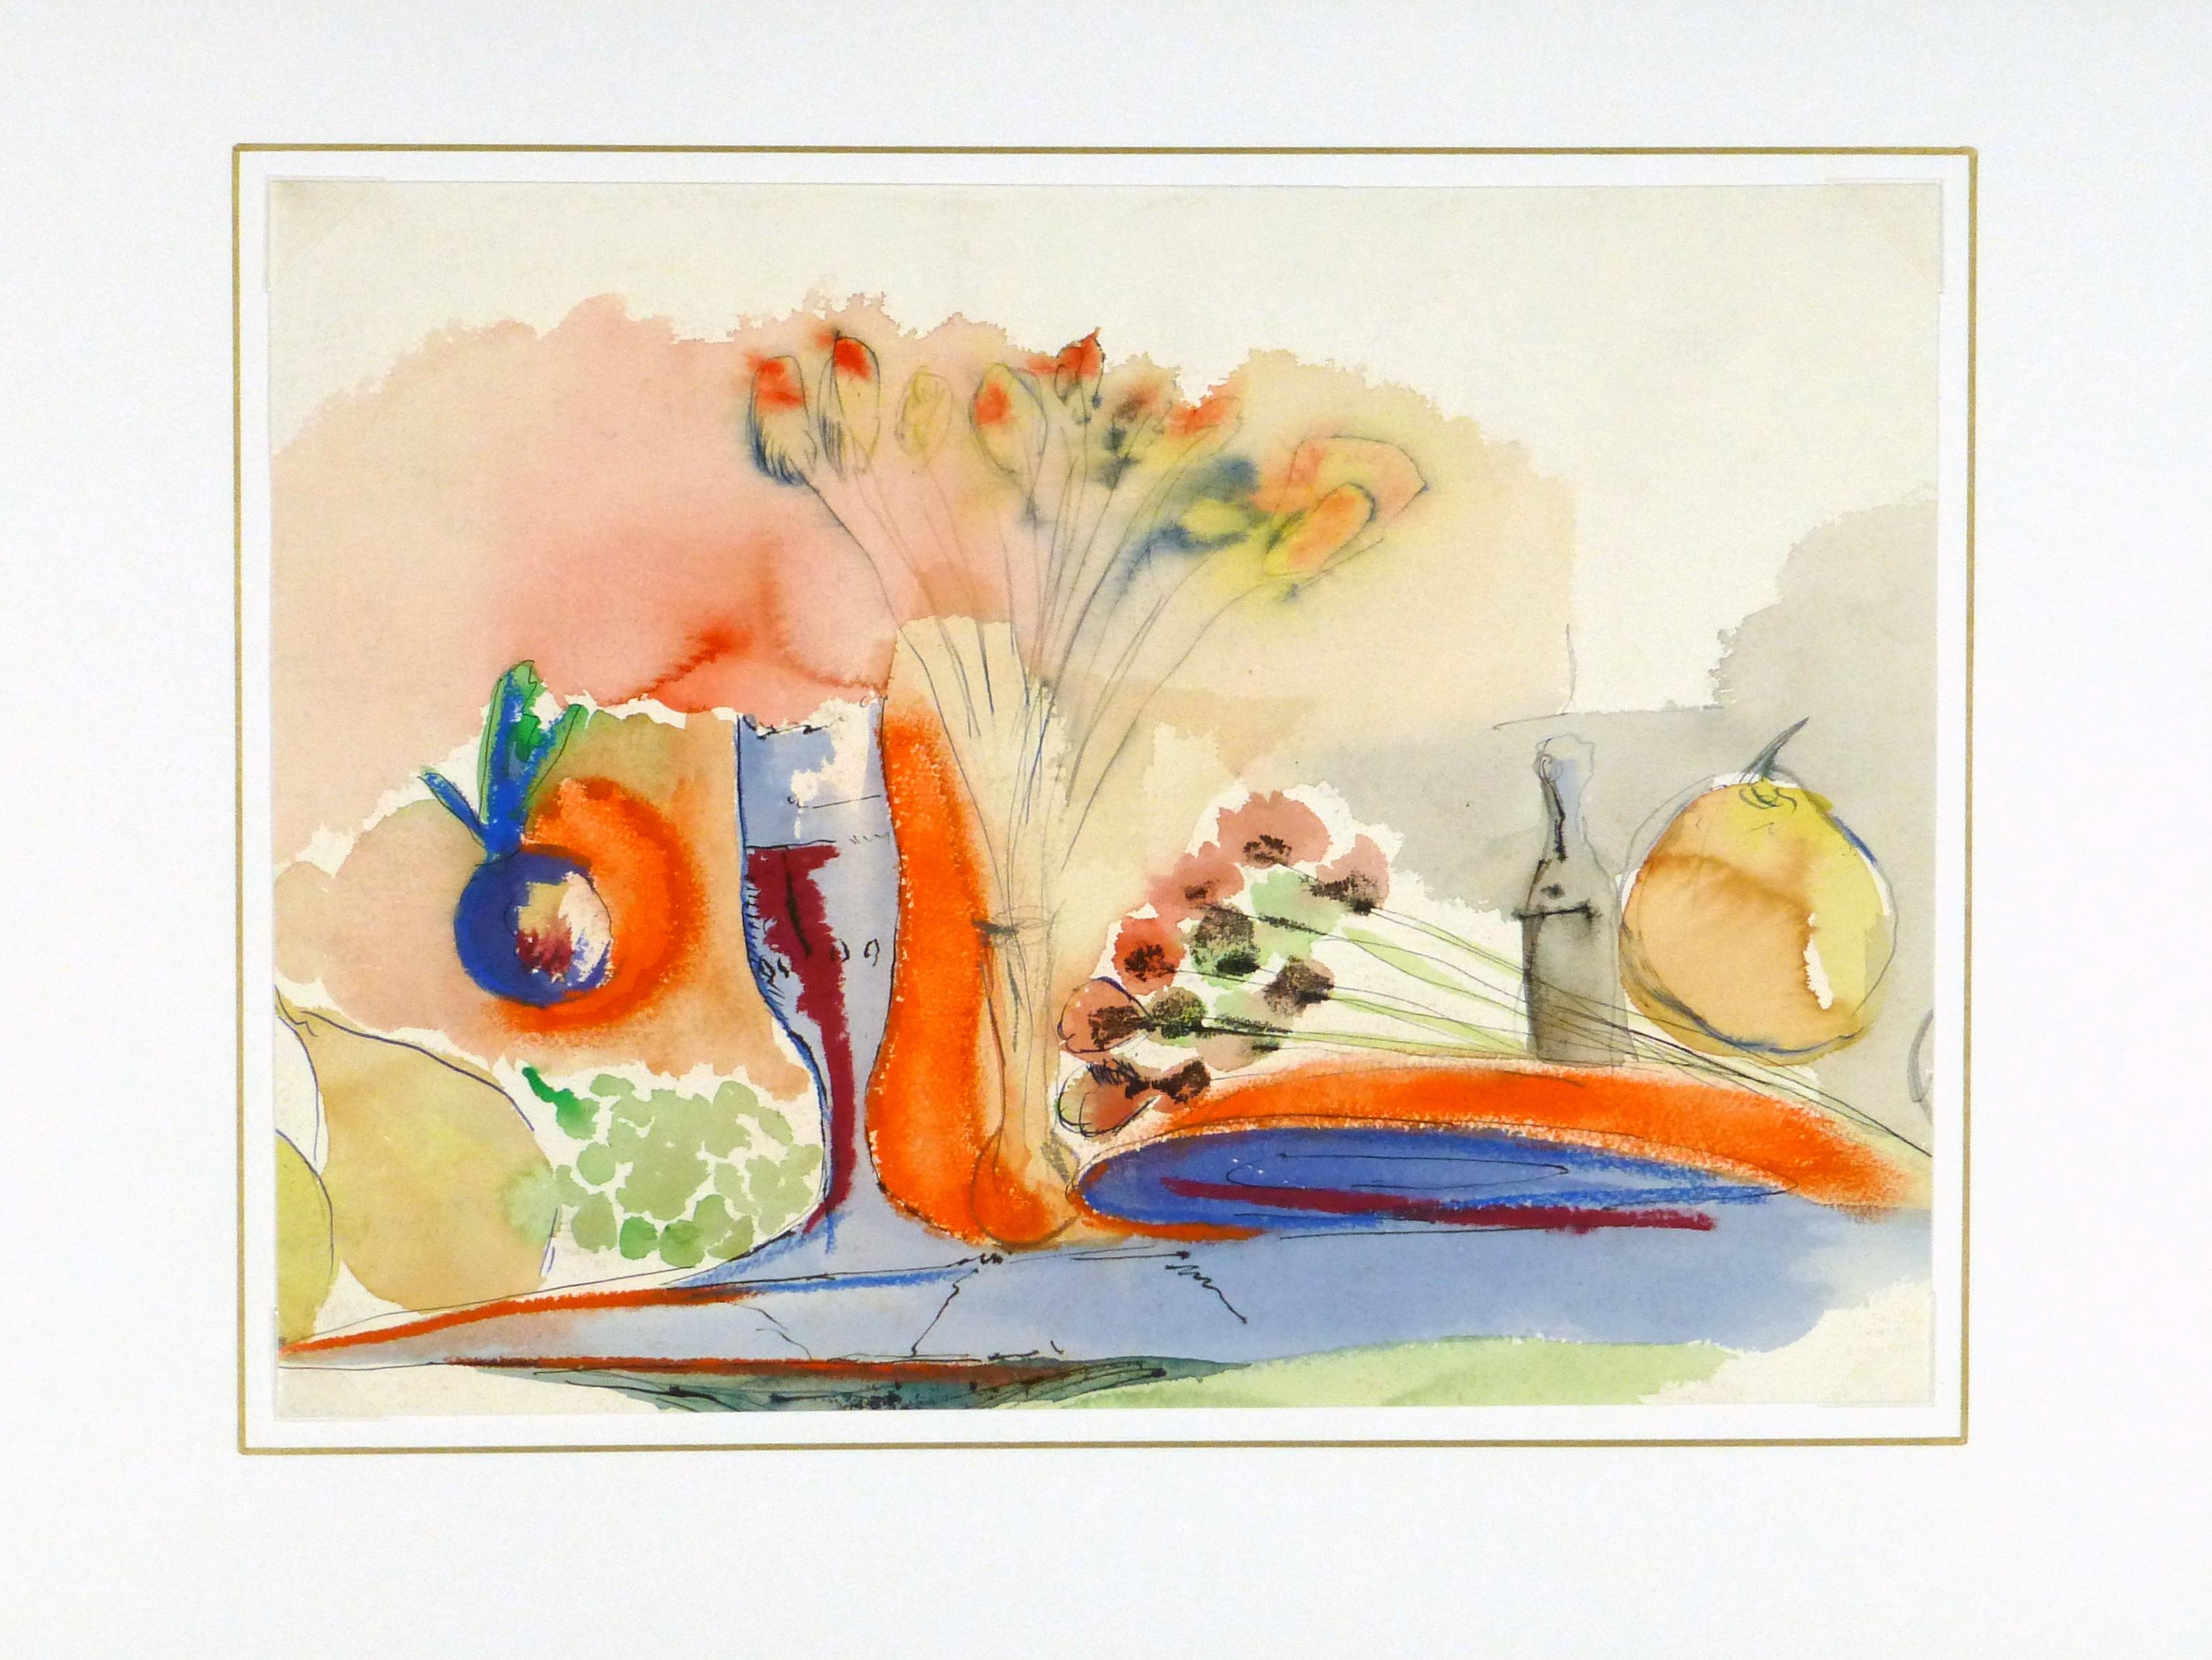 Dreamy French watercolor and ink table still life of fruit, flowers, and a wineglass, circa 1960. 

Displayed on a white mat with a gold border and fits a standard-size frame. Archival plastic sleeve and Certificate of Authenticity included.